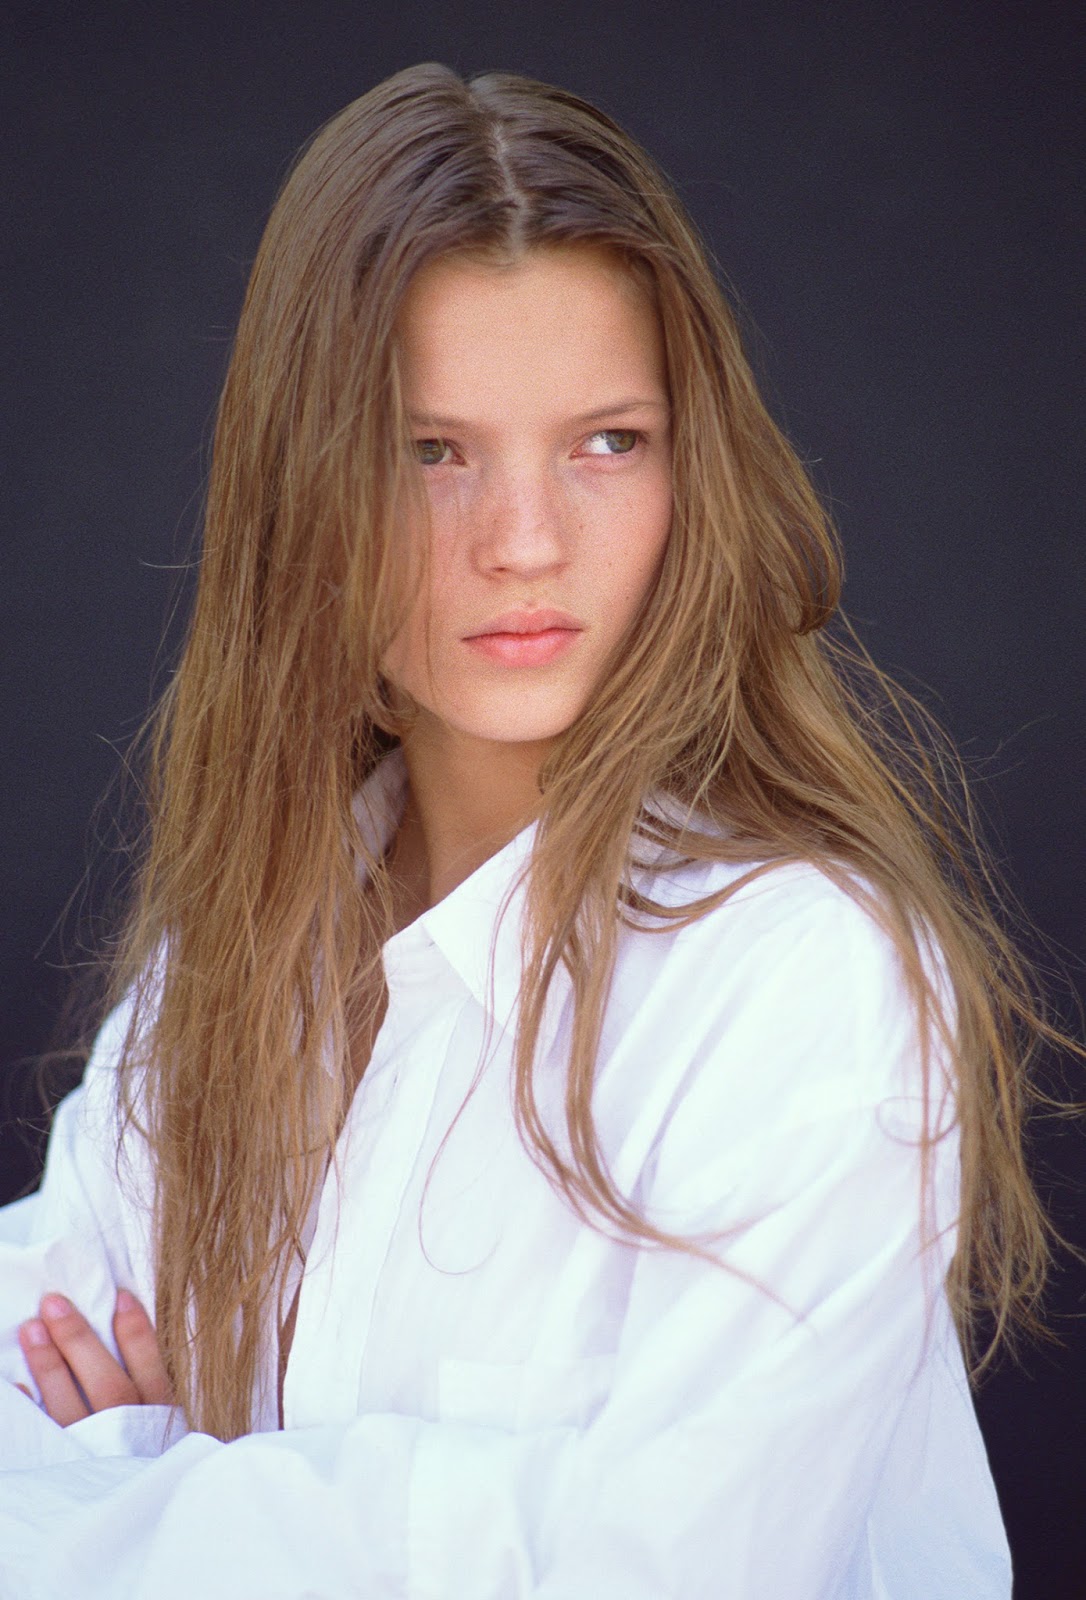 Rarely Seen Images of a 14-Year-Old Kate Moss Taken During Her First ...